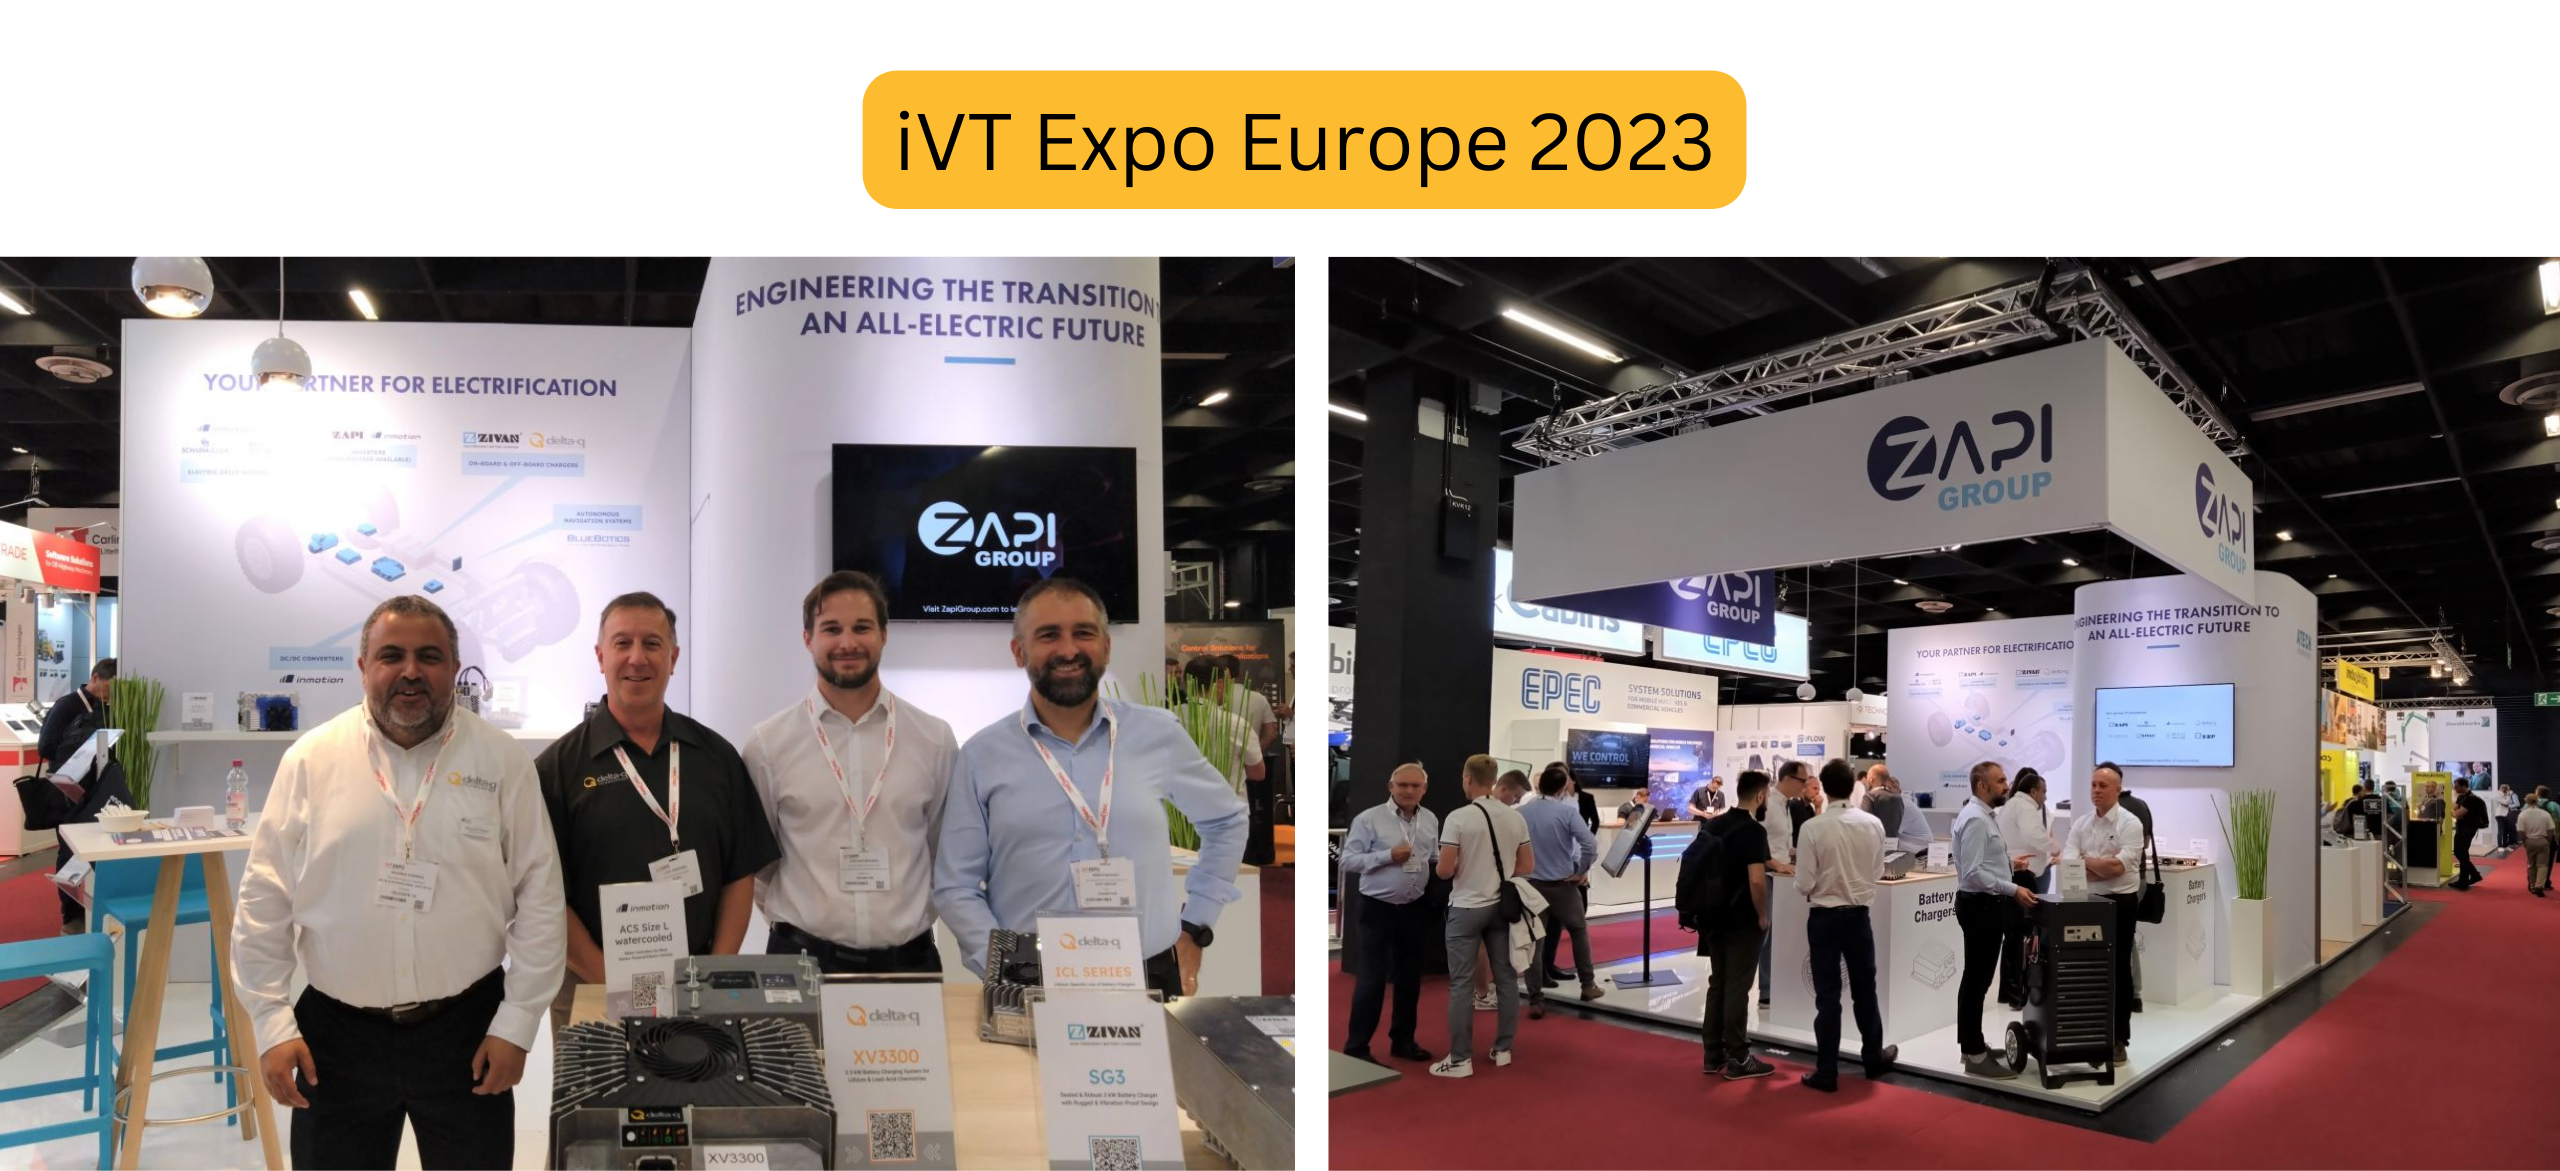 iVT Expo Europe 2023: Recap and Post-Show Wrap Up